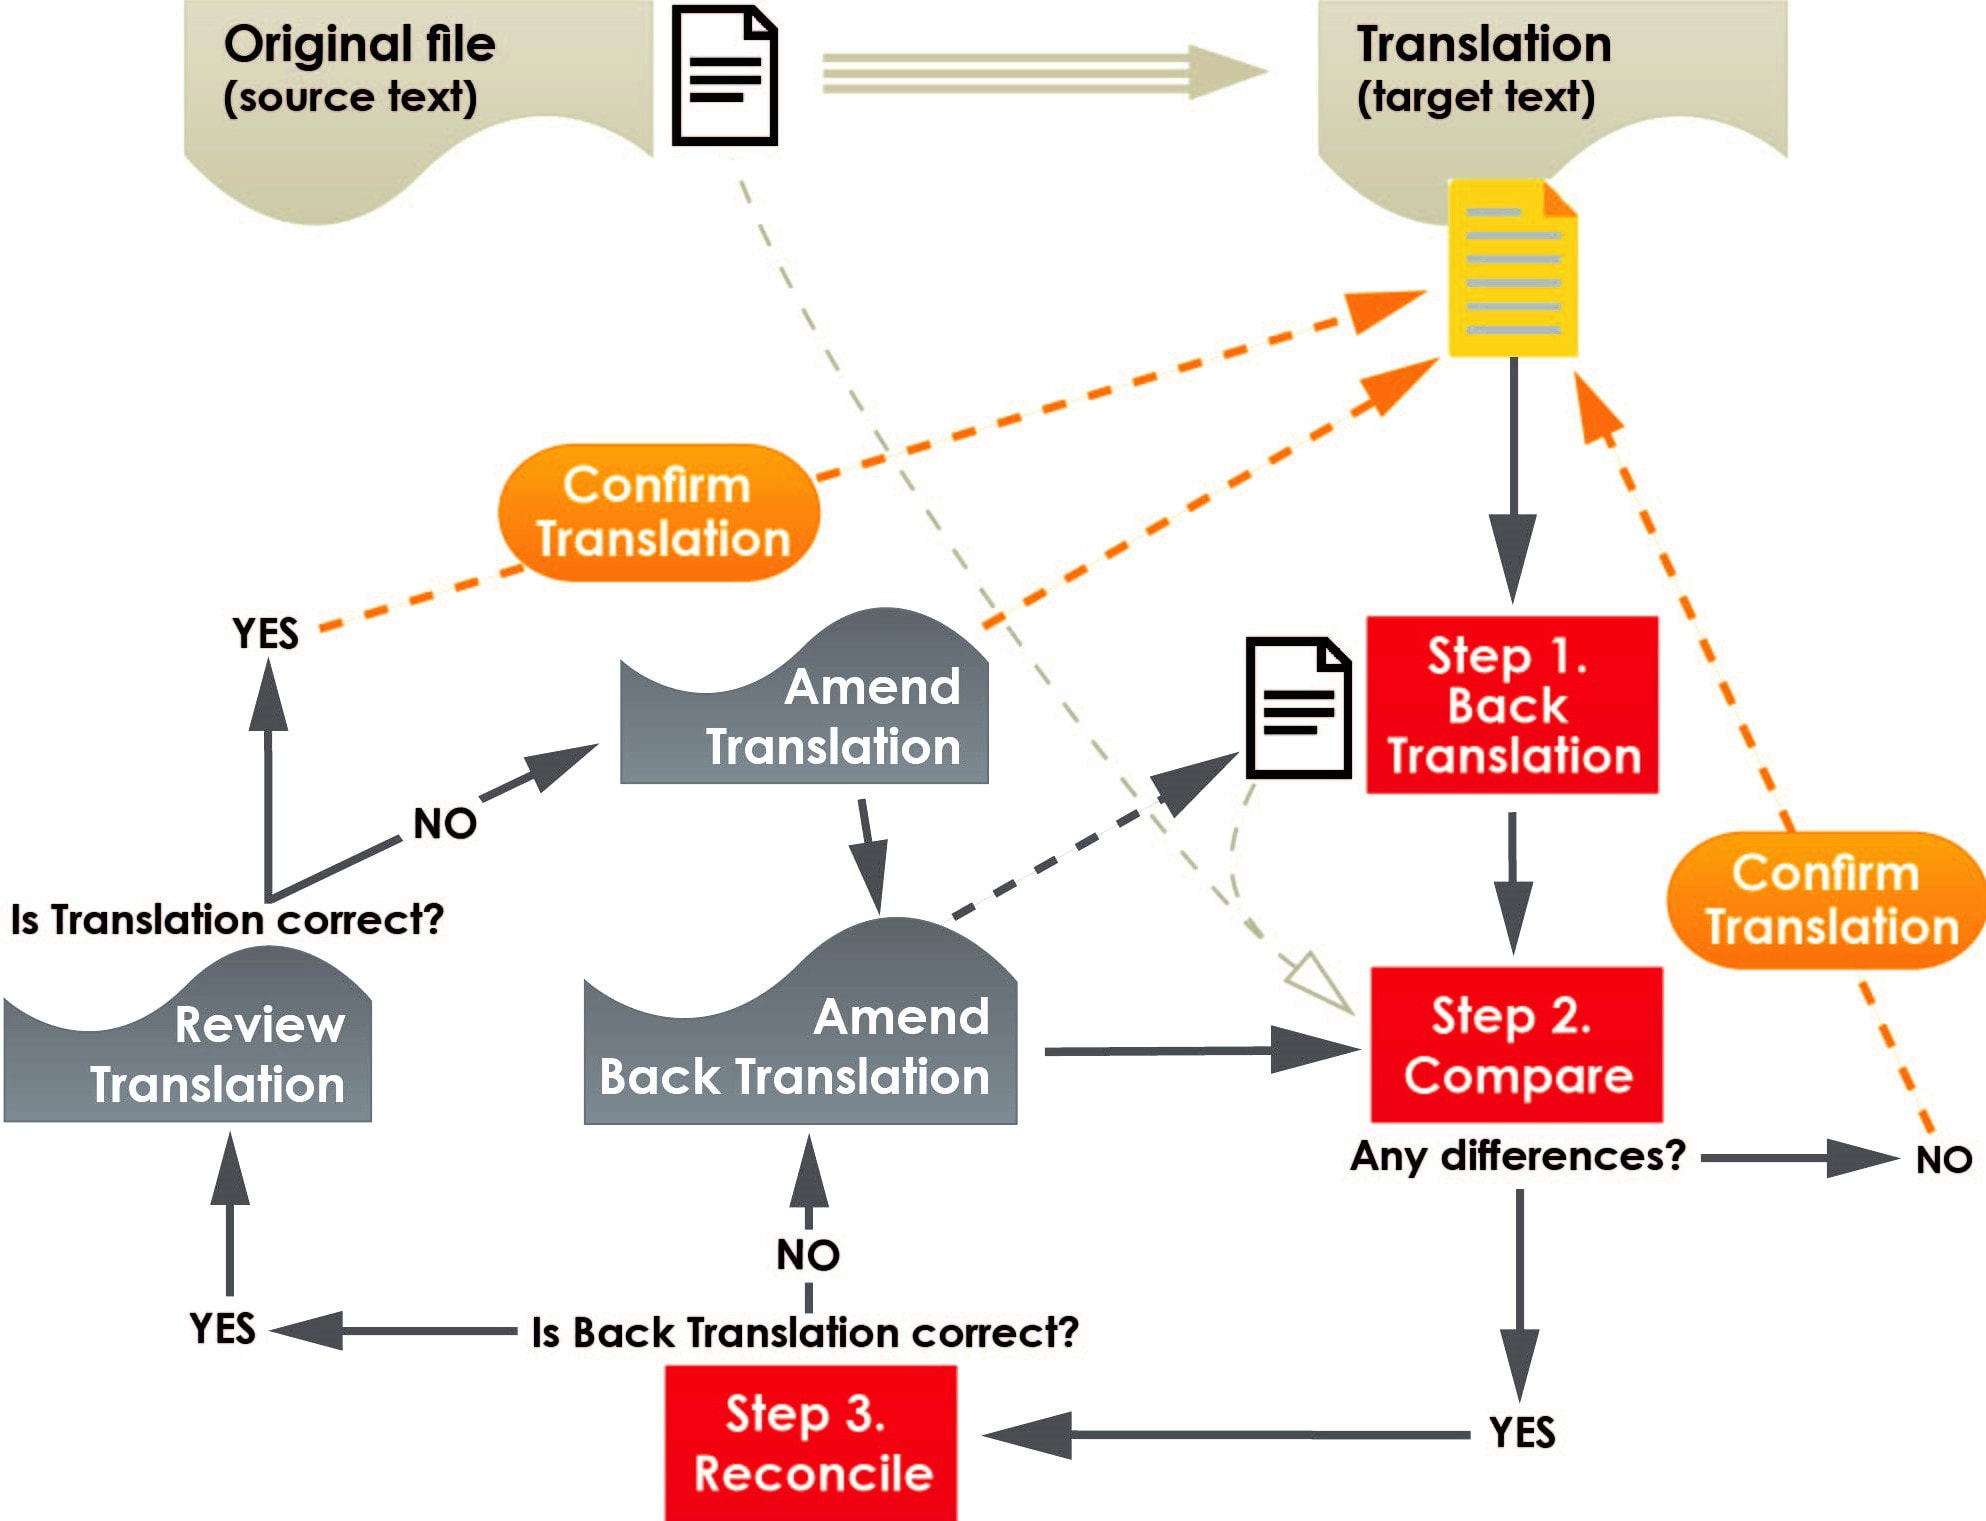 Here is a schematic of the back translation work flow.